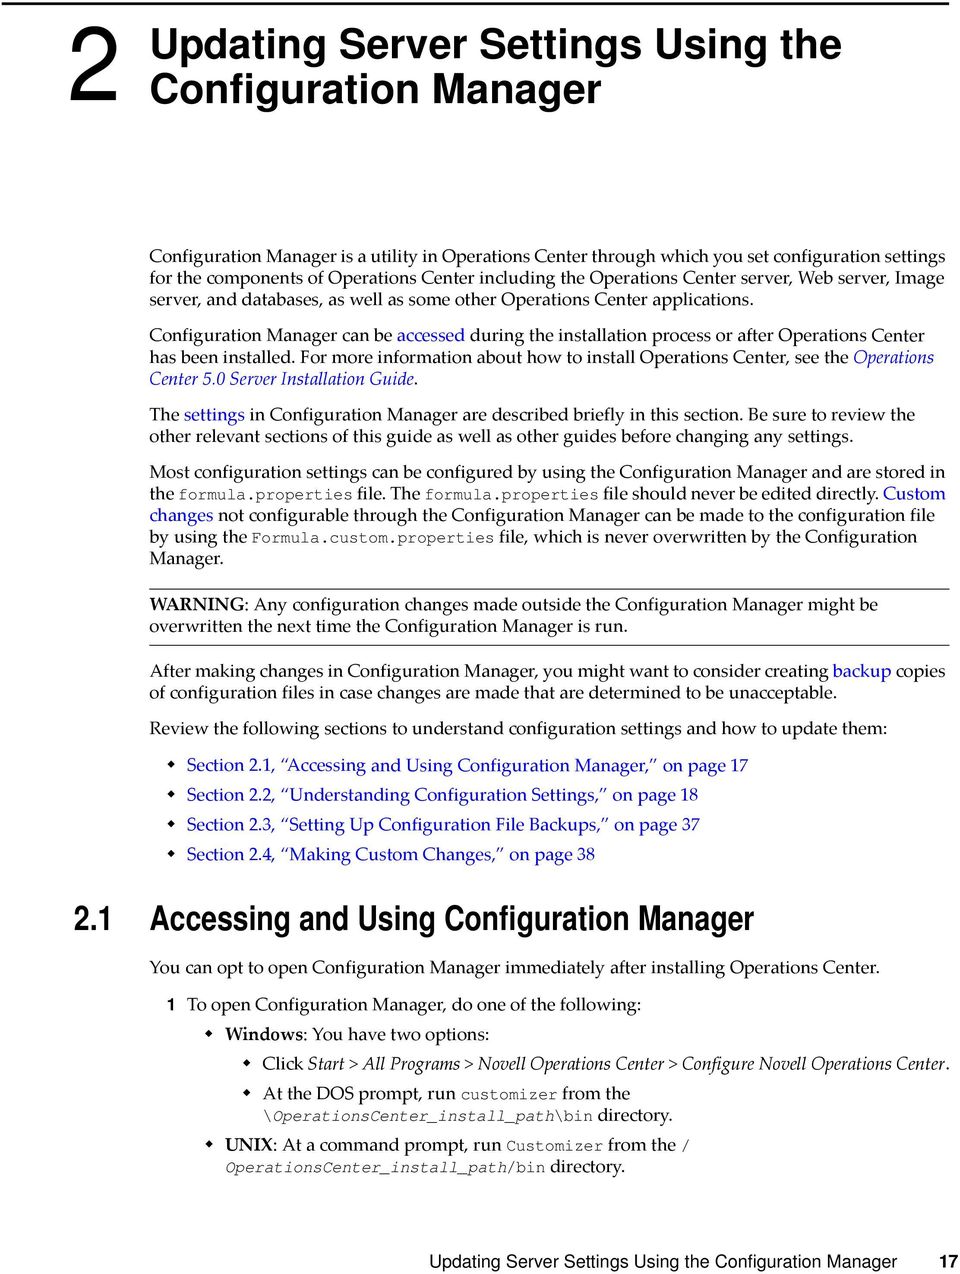 Configuration Manager can be accessed during the installation process or after Operations Center has been installed.